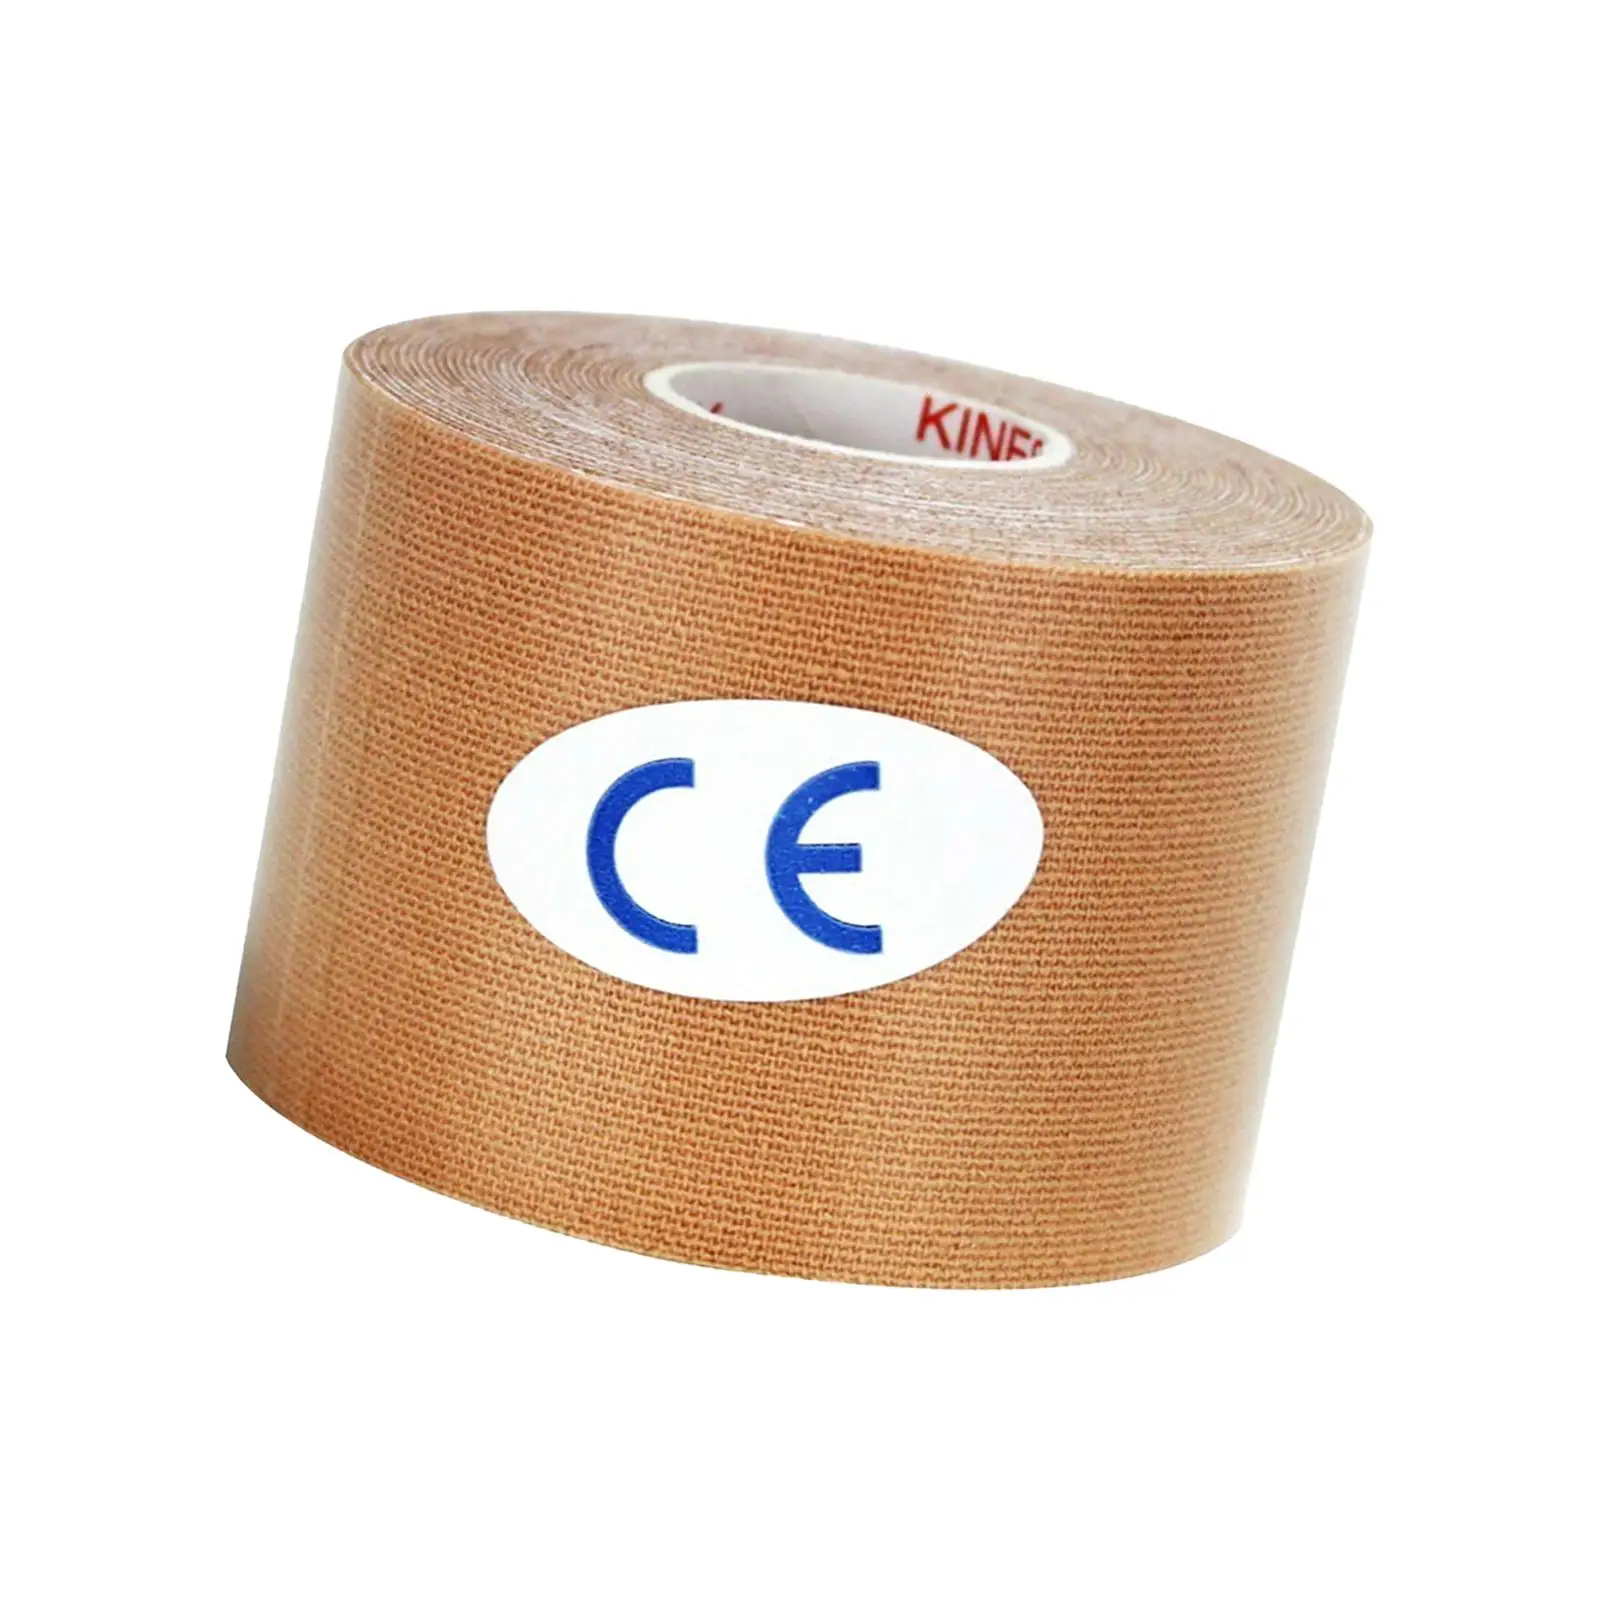 Athletic Tape Muscle Tape Waterproof Protective Tape for Shoulder Knee Chest